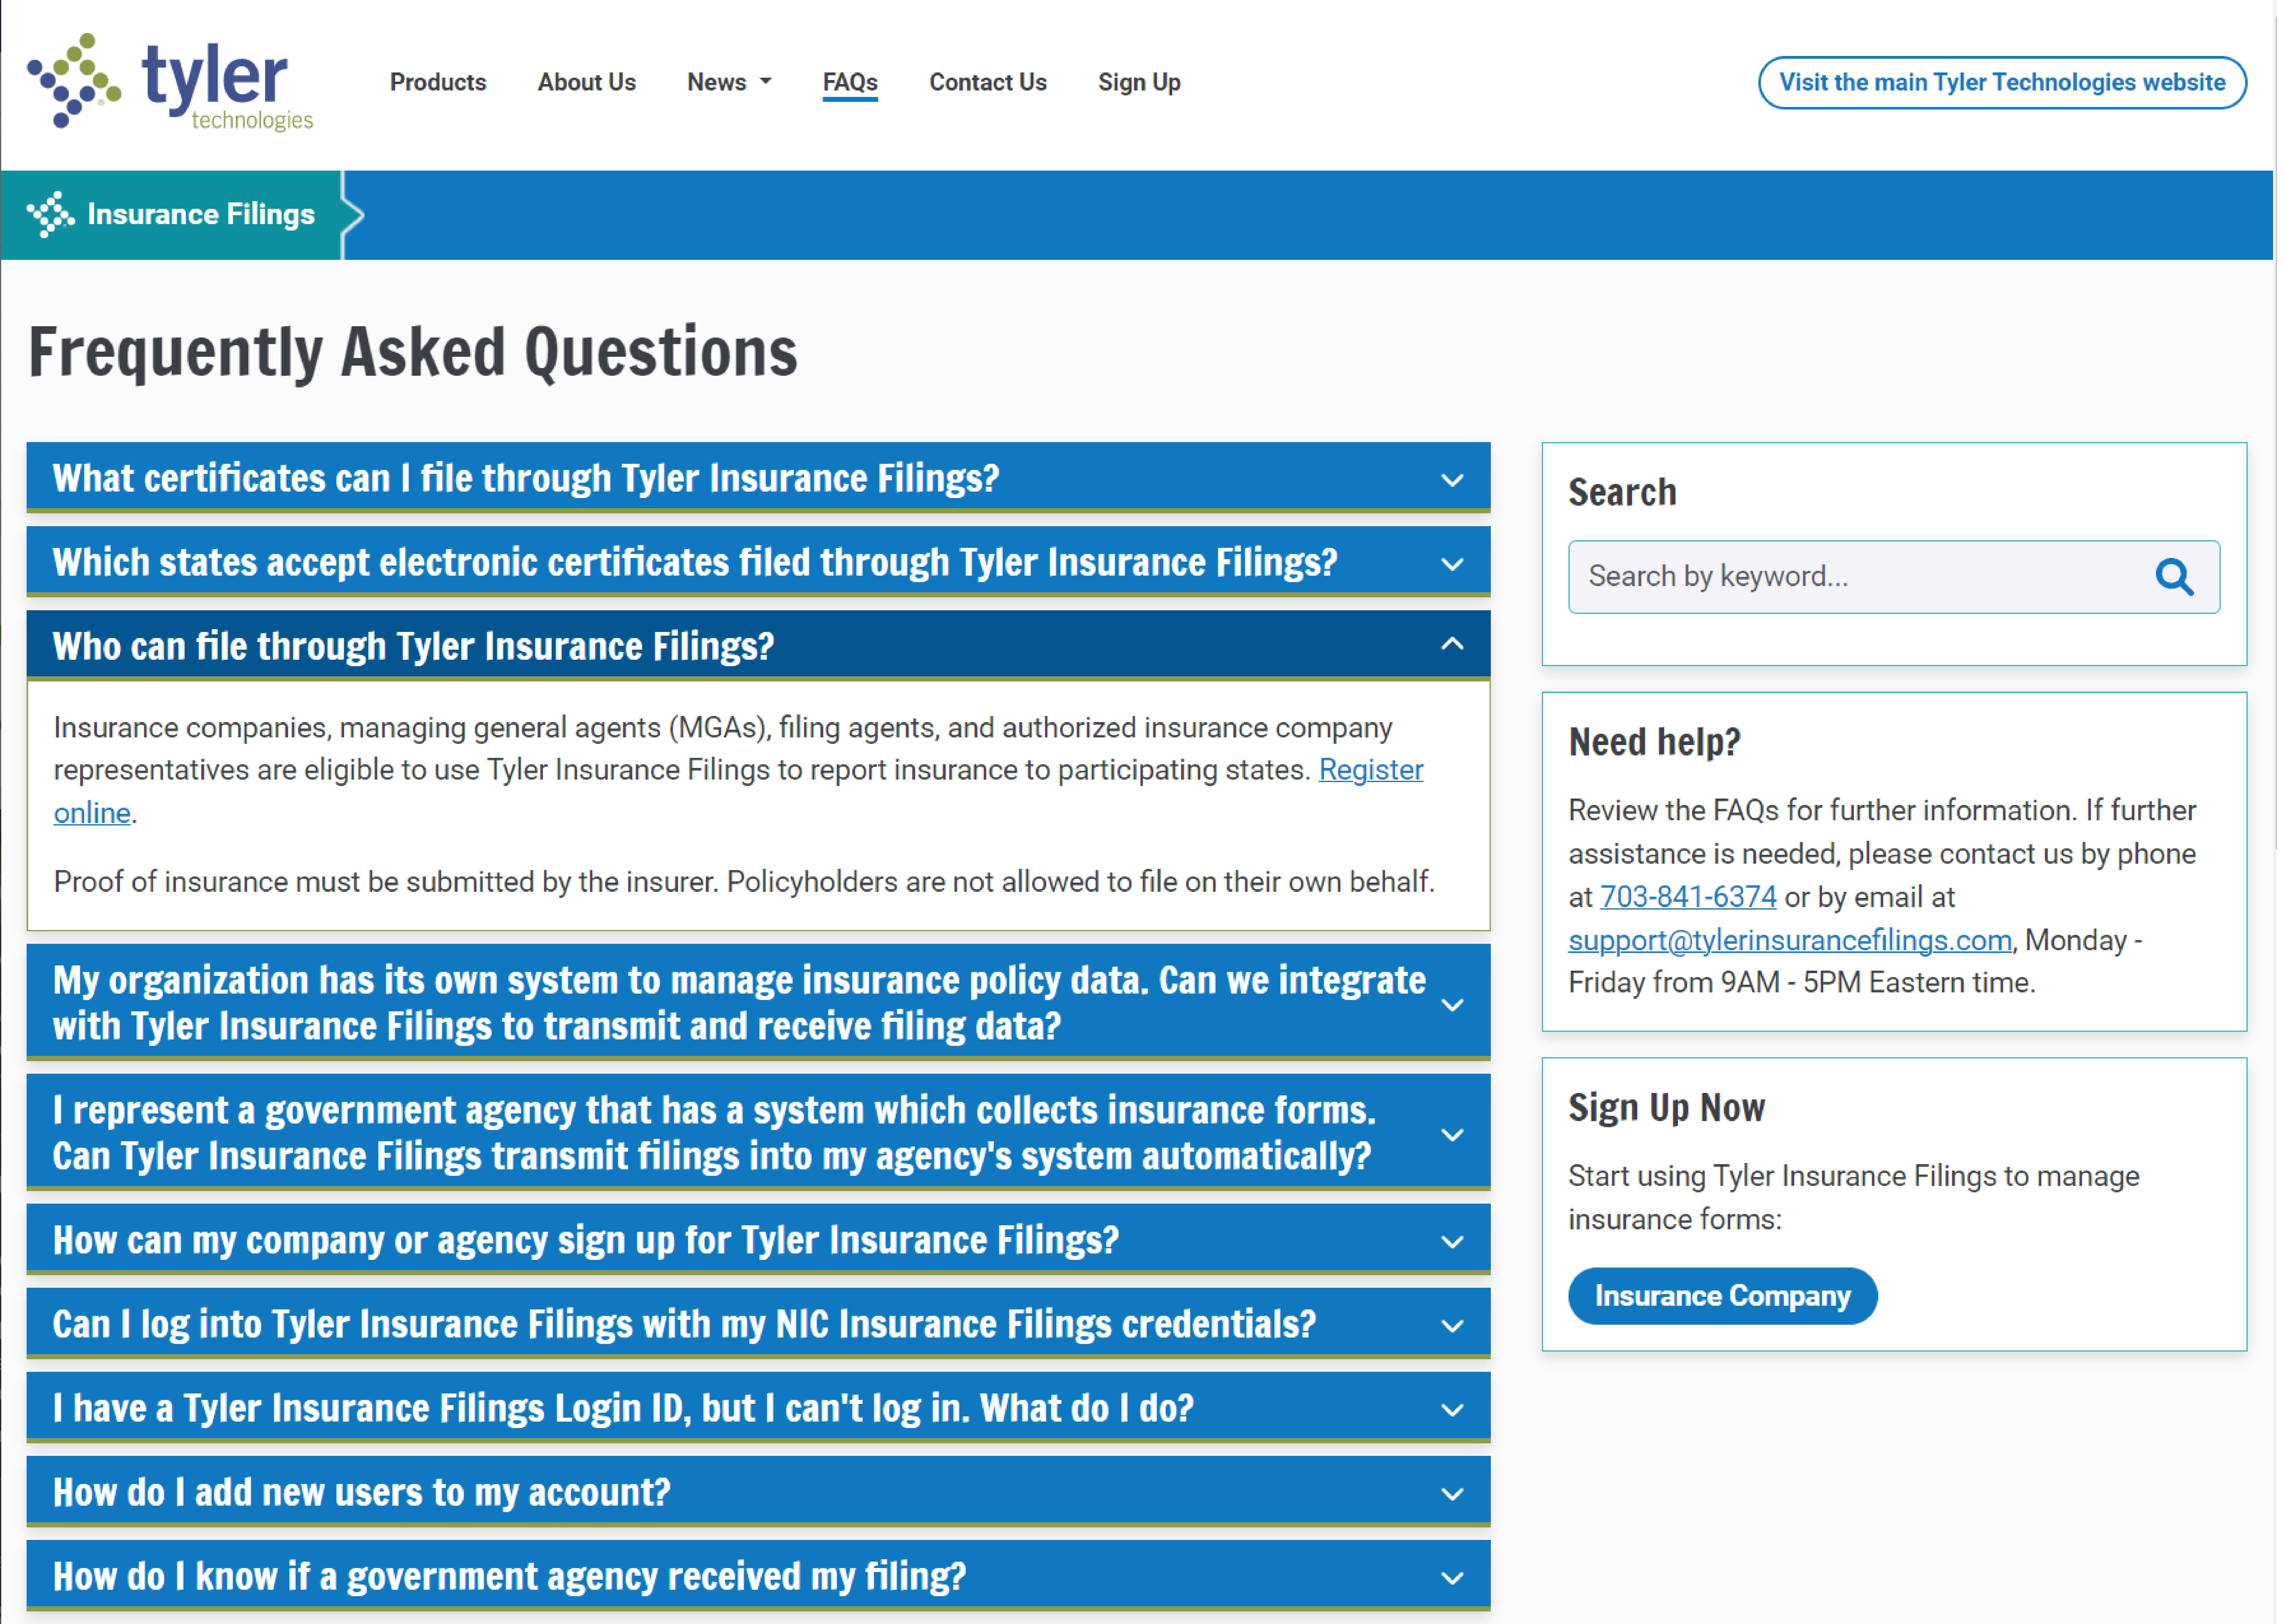 The updated Frequently Asked Questions page, showing commonly asked questions, is now easier to navigate with accordion menus and search.